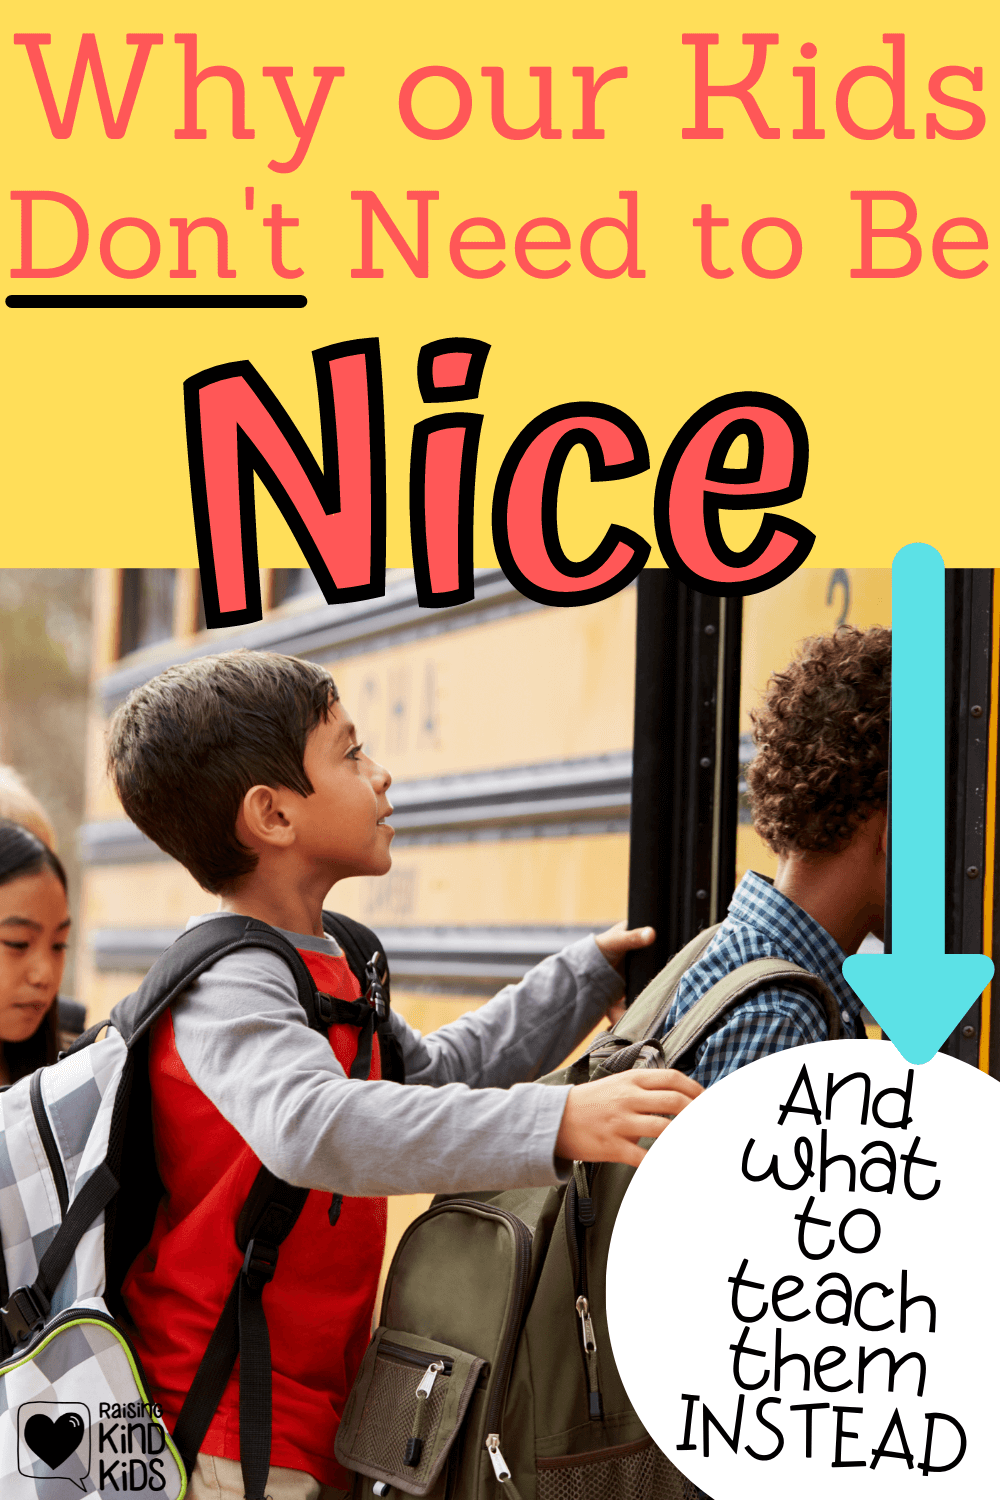 We want our kids to be kind, but our kids don't need to be nice. But we should be doing this instead to raise our kids to be the best version of themselves. This parenting advice will help teach your kids to be happier too! #parenting #parentingadvice #coffeeandcarpool #positiveparenting #raisingkindkids #kindness #nicekids #nice